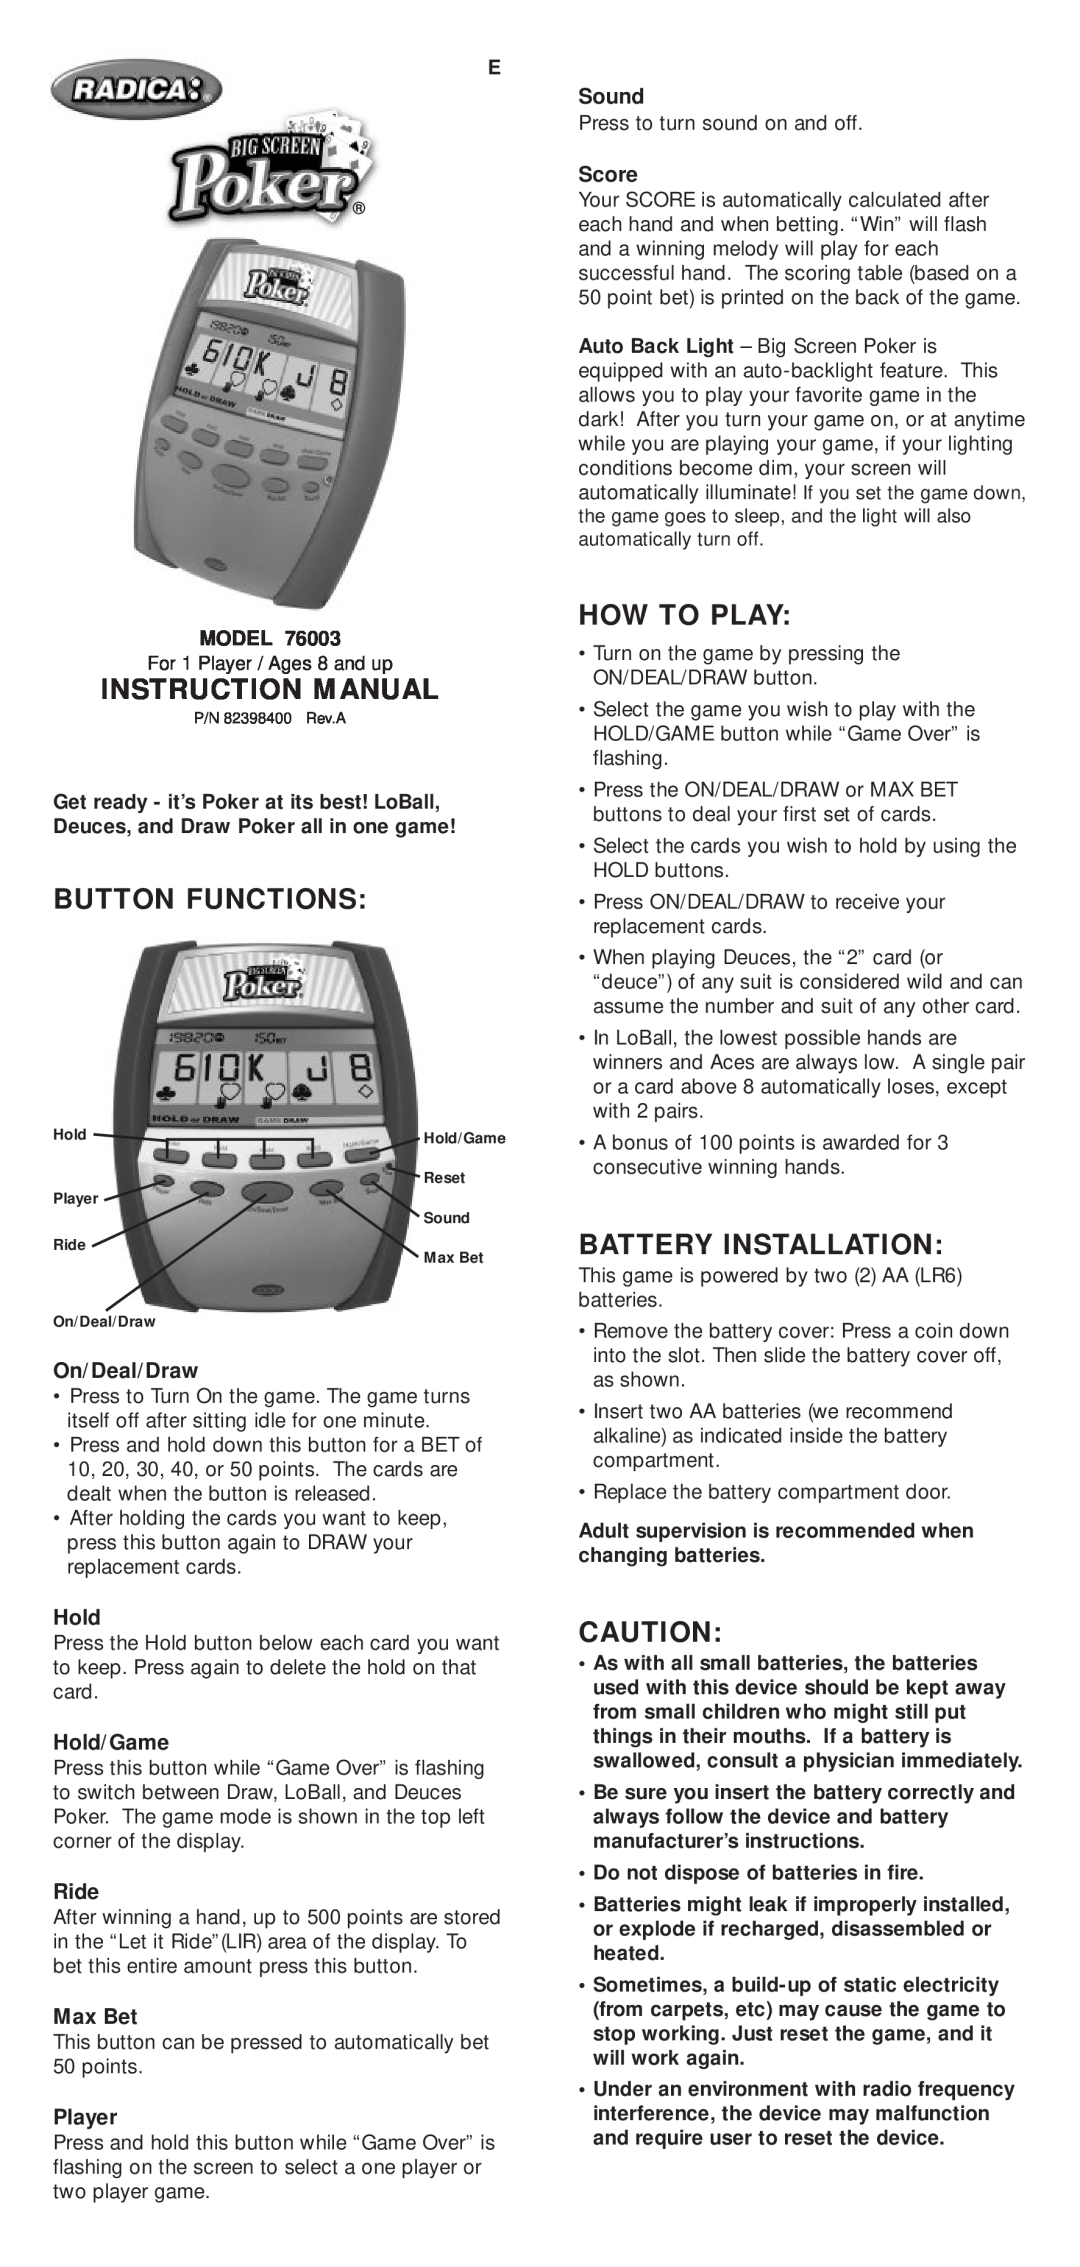 Radica Games 76003 instruction manual Instruction Manual, Button Functions, How To Play, Battery Installation, Model 